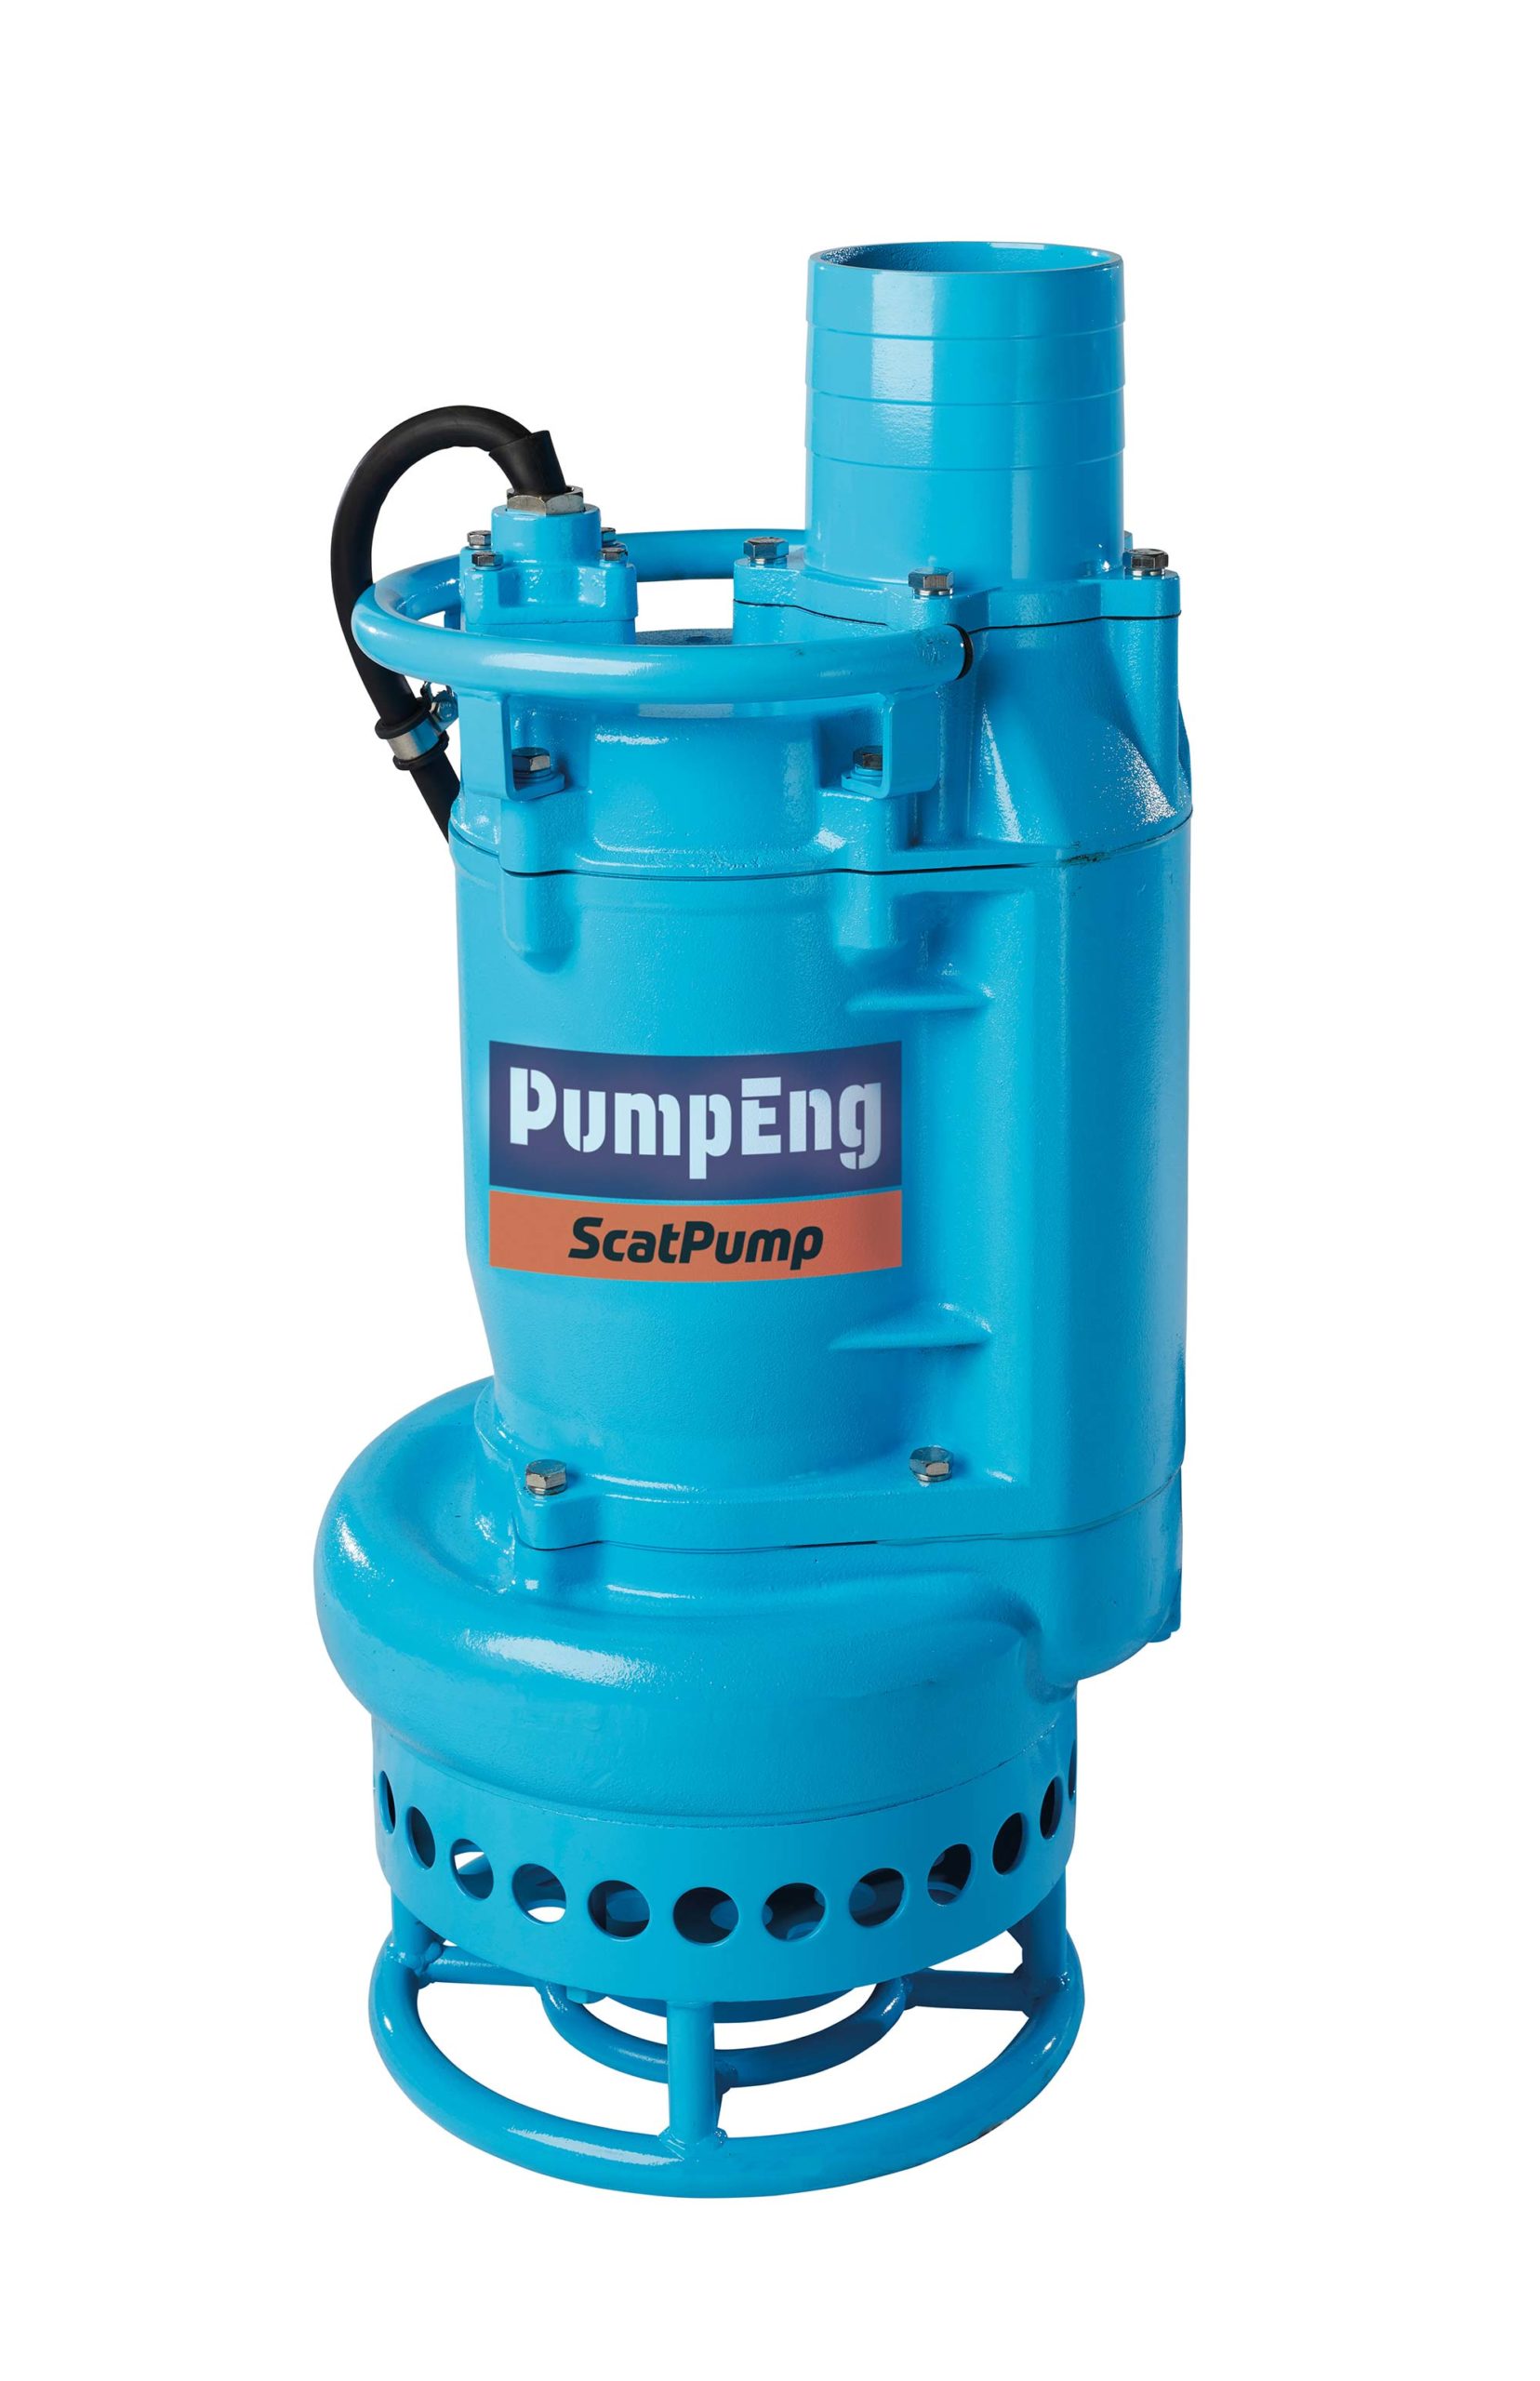 ScatPump slurry pump with the PumpEng logo printed on the front